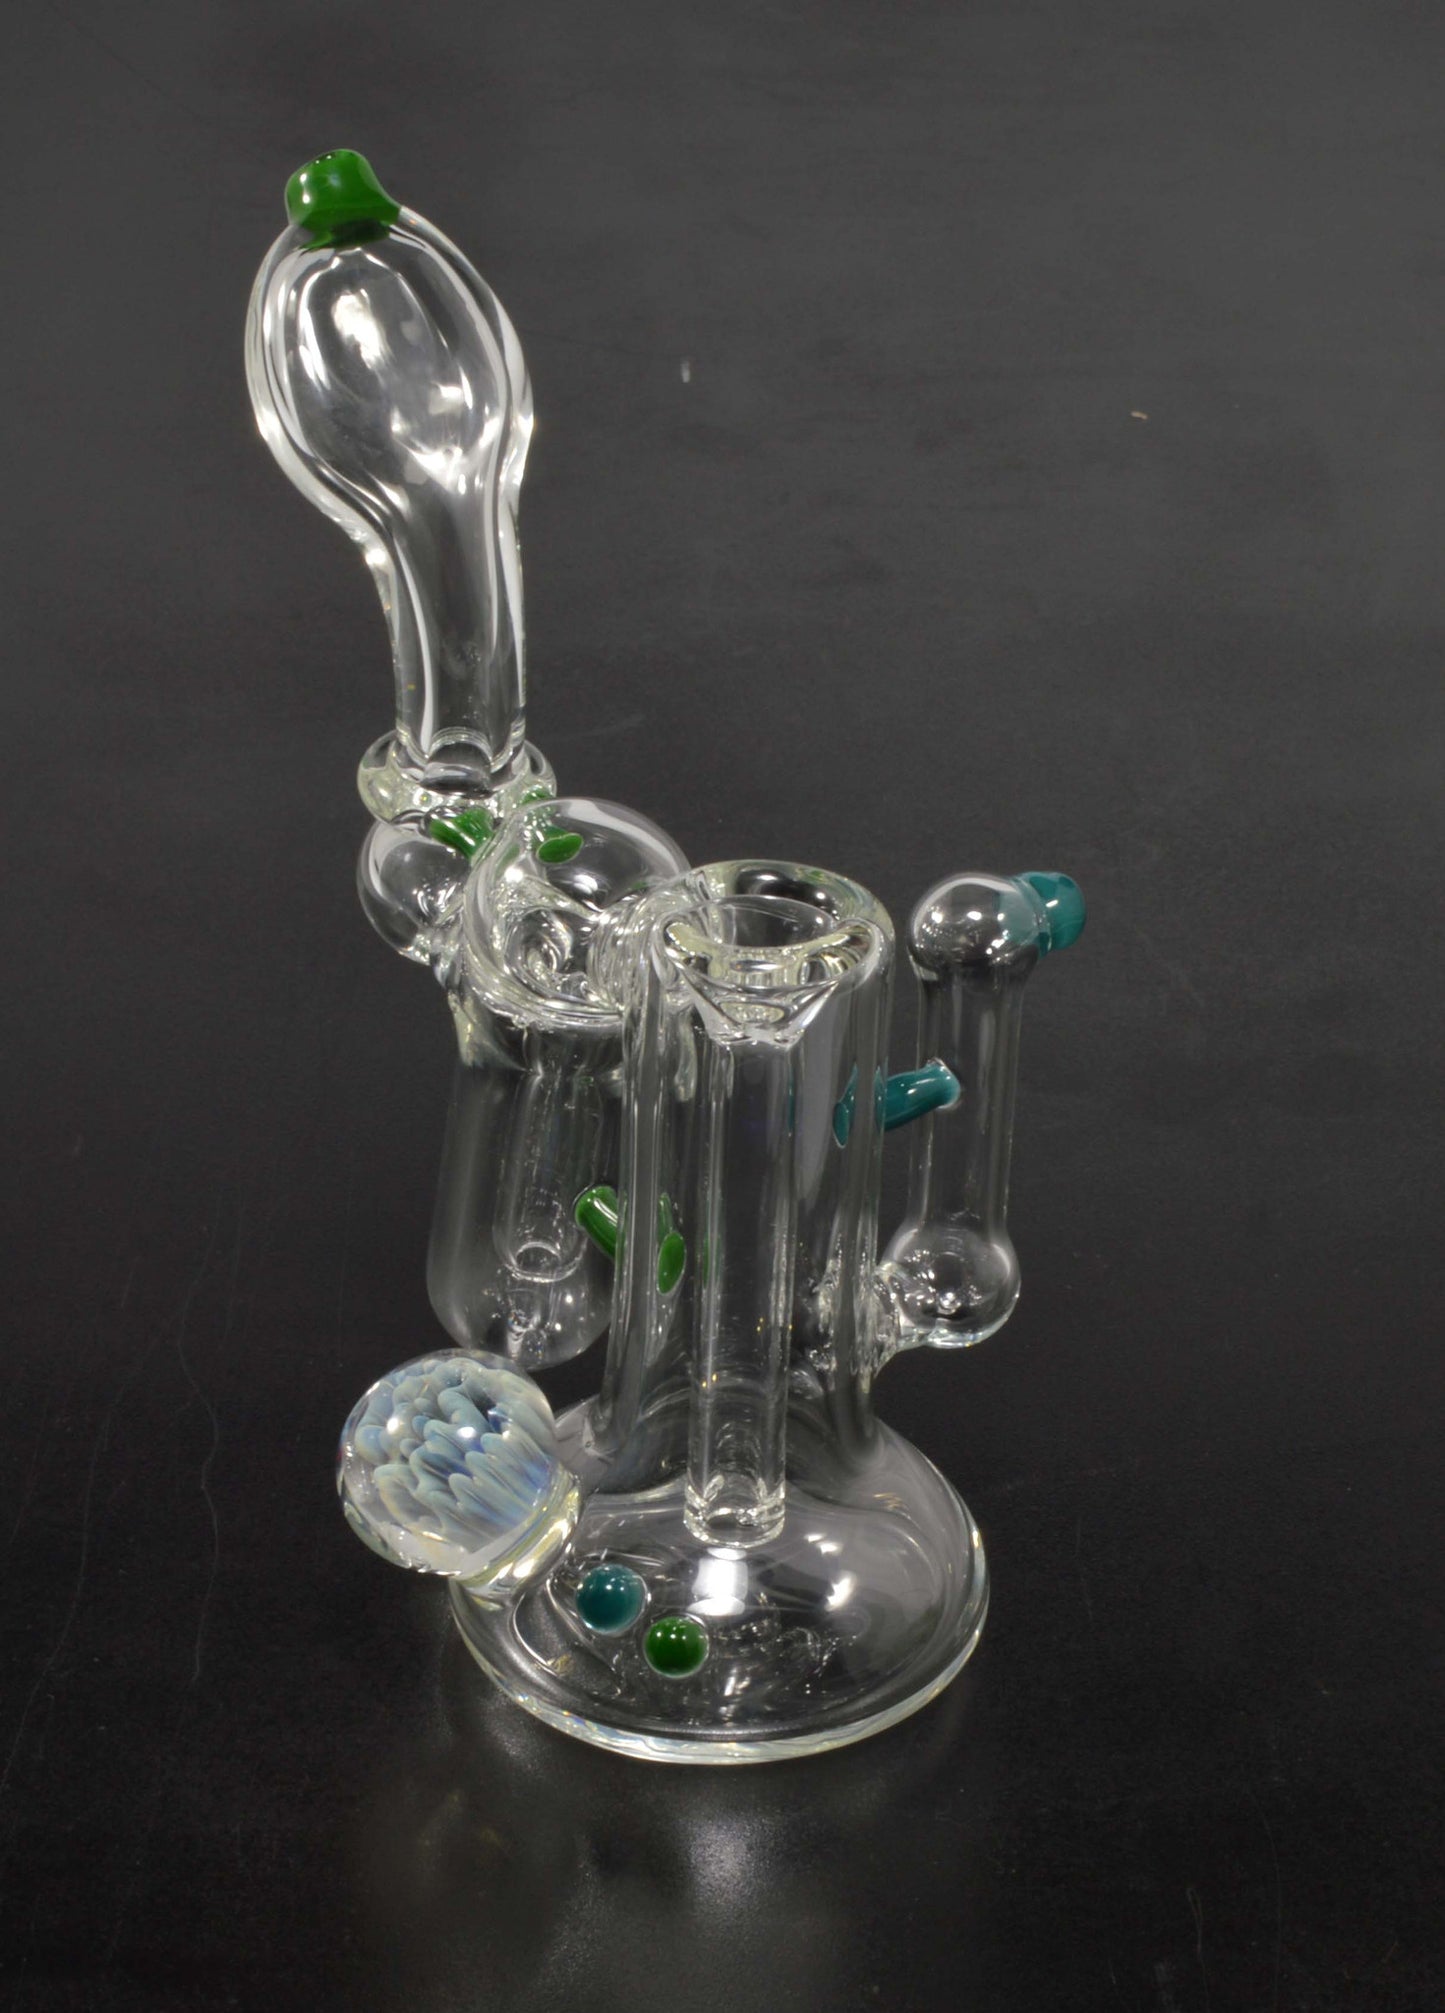 Double bubbler with color and horn accents